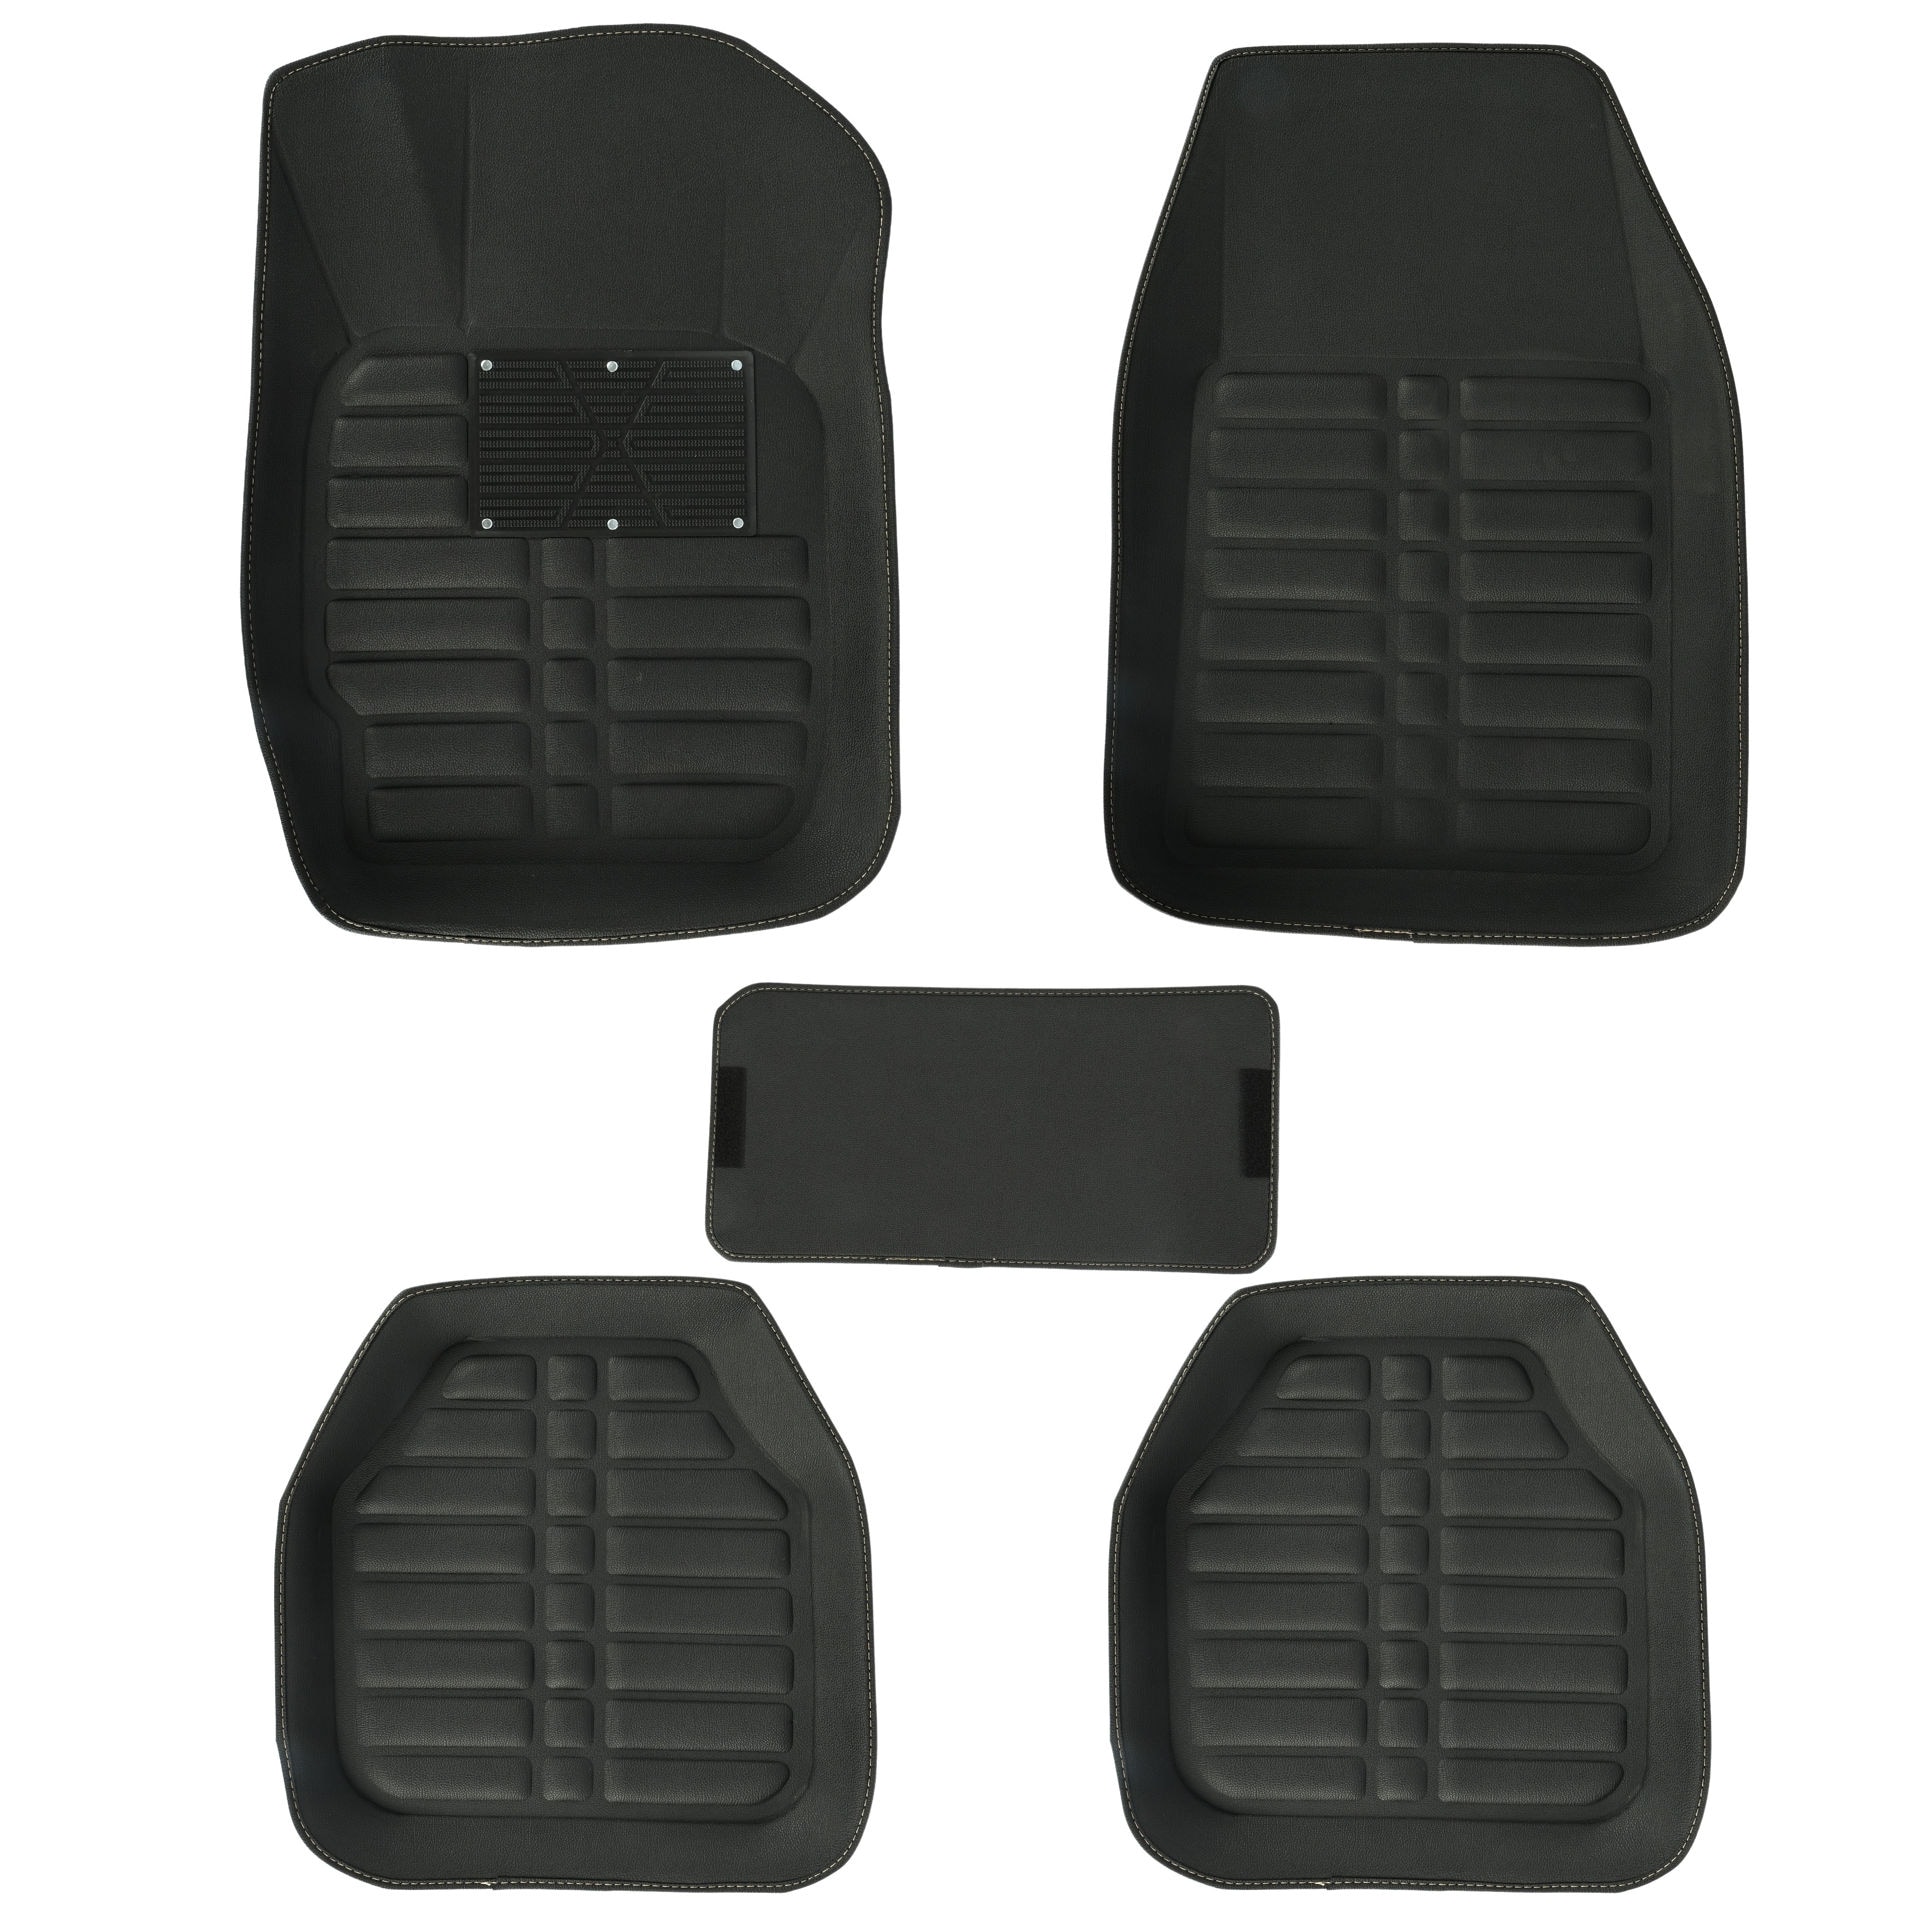 Shop GENERIC Rubber Universal Size Floor Mat for Cars with Pedals